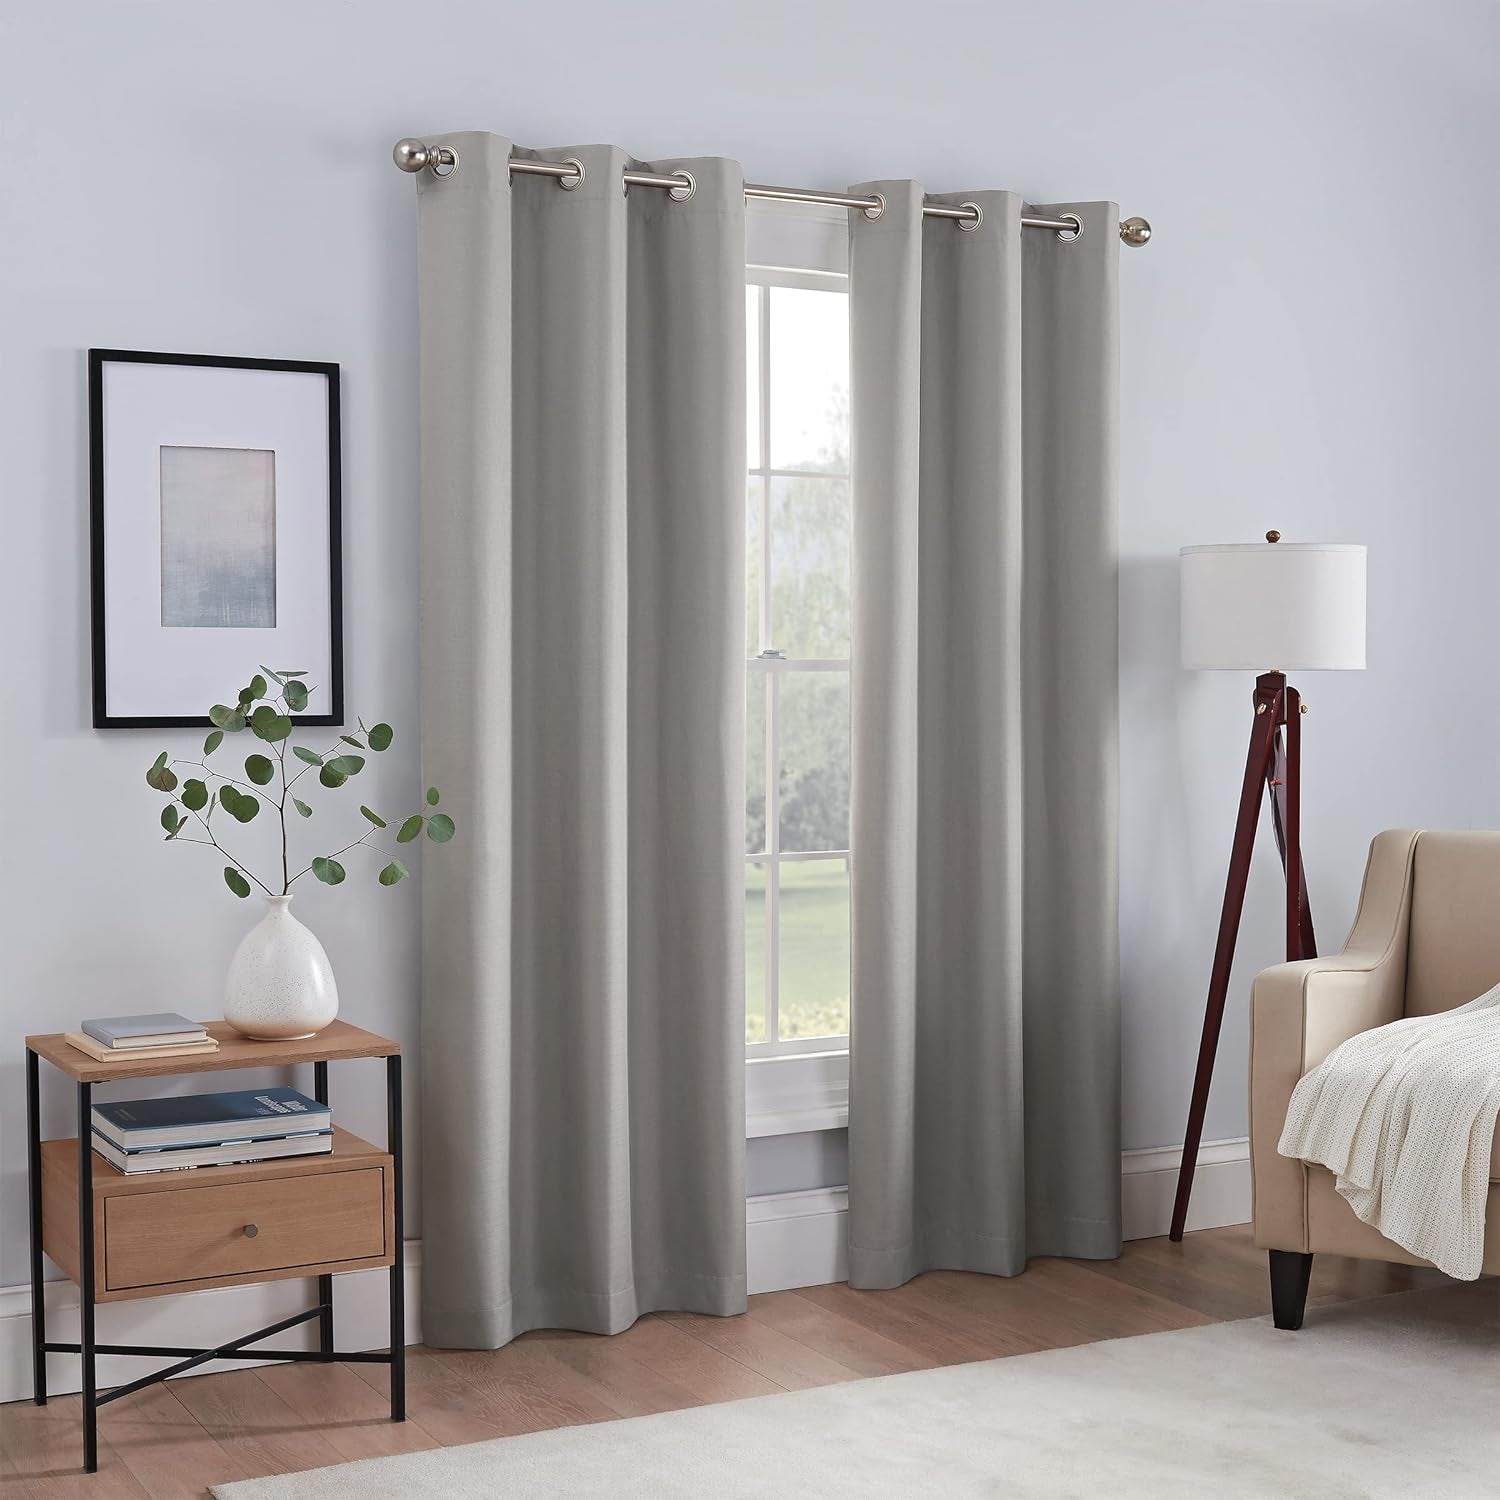 Eclipse Kylie Absolute Zero Blackout Noise Reducing Grommet Lined Window Curtains for Living Room (2 Panels), 37 in X 84 In, Grey  Keeco LLC   